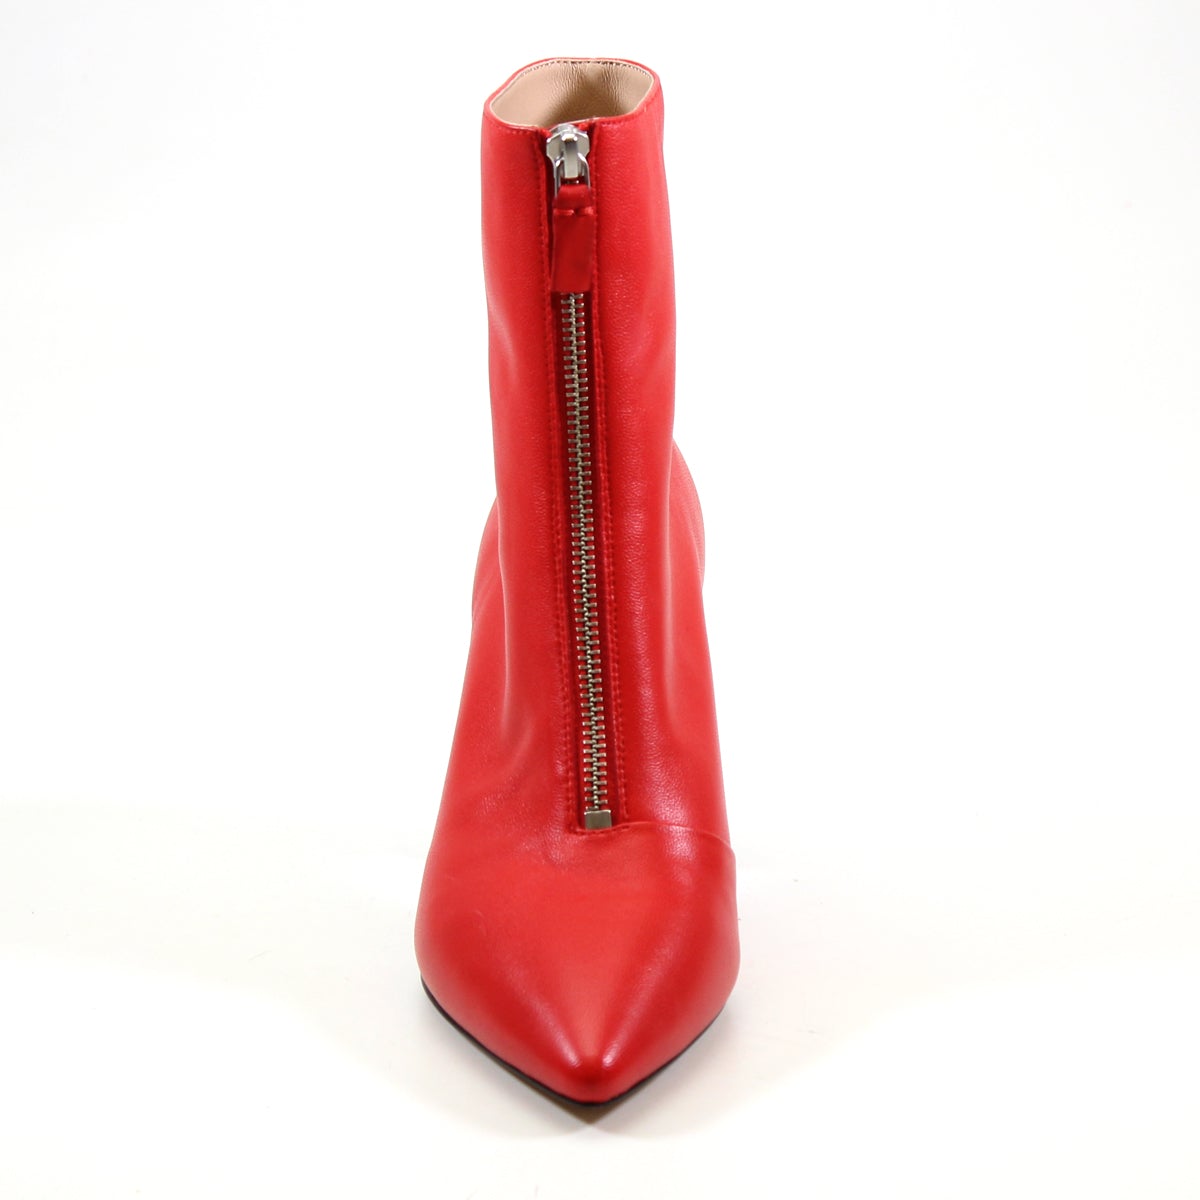  Luichiny LTD THRILL HILL in Red - Diba Shoes